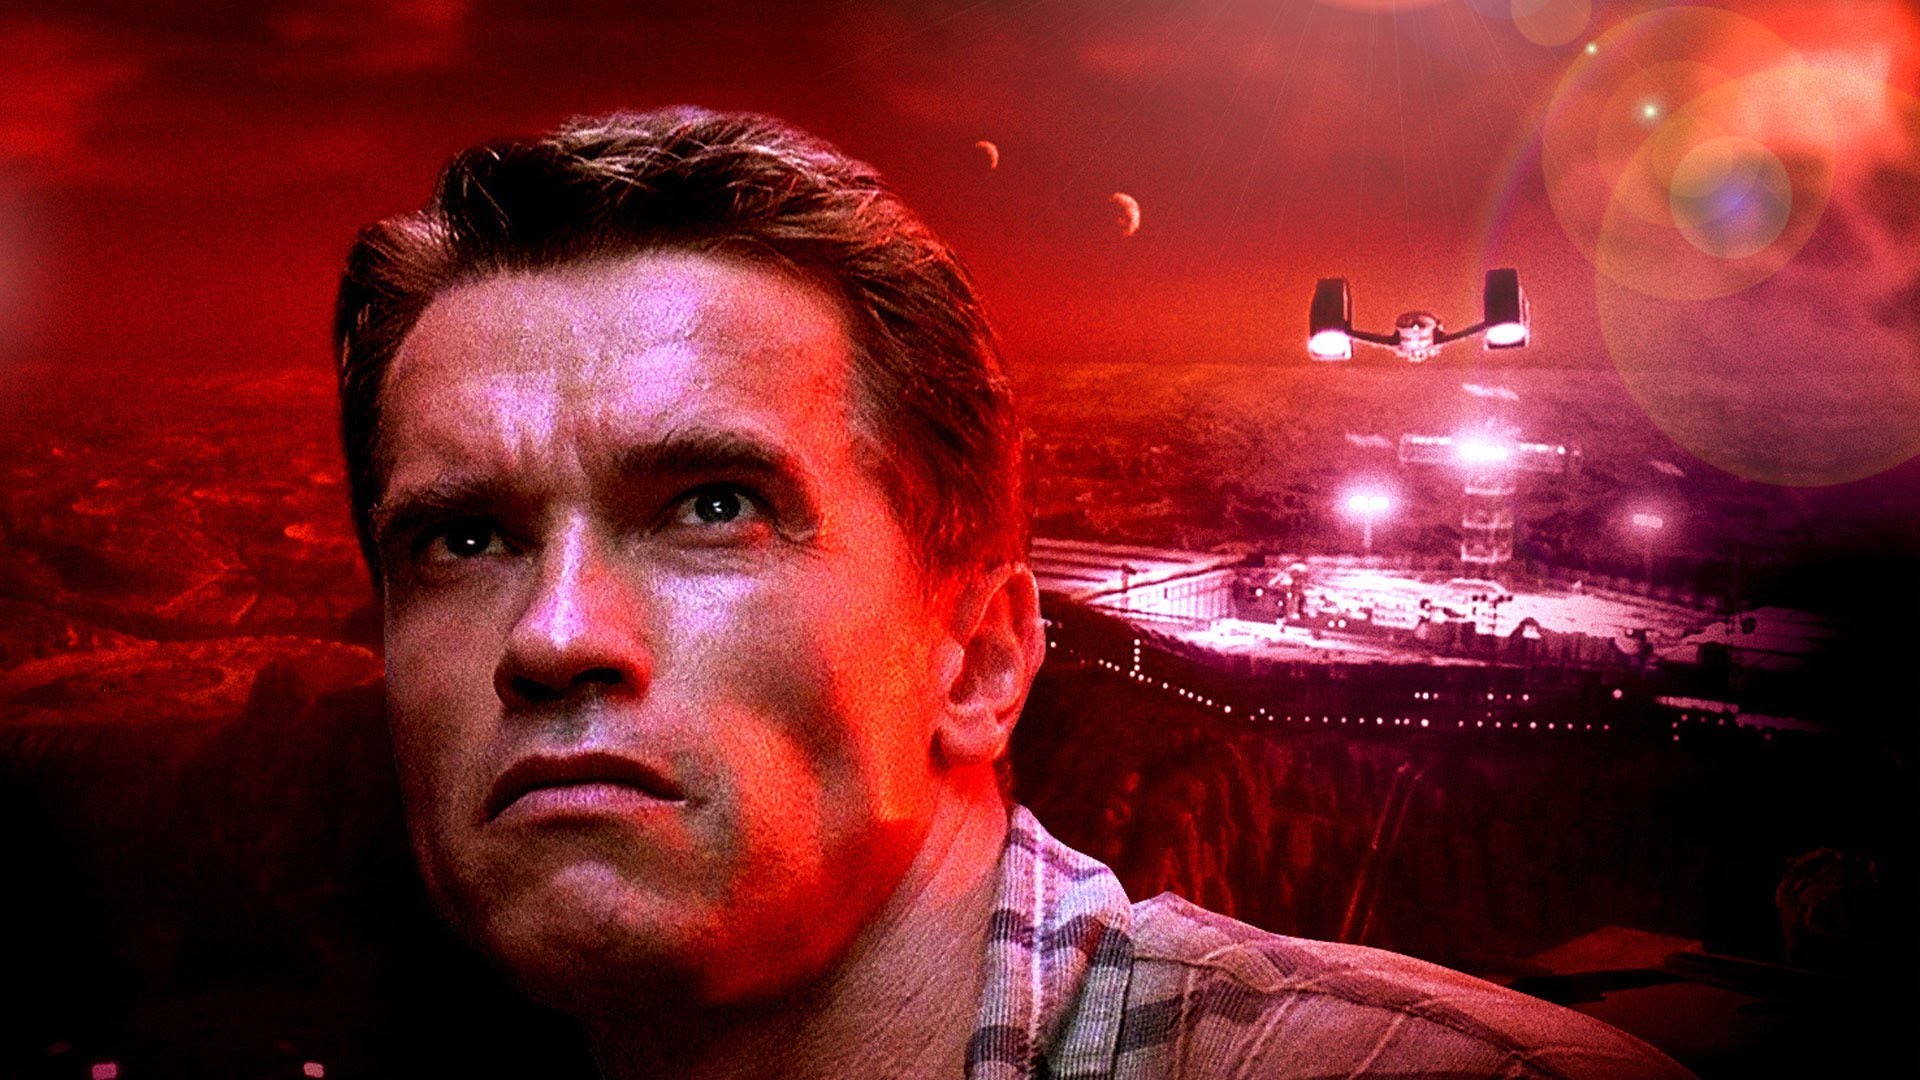 Total Recall (2012) Wallpapers